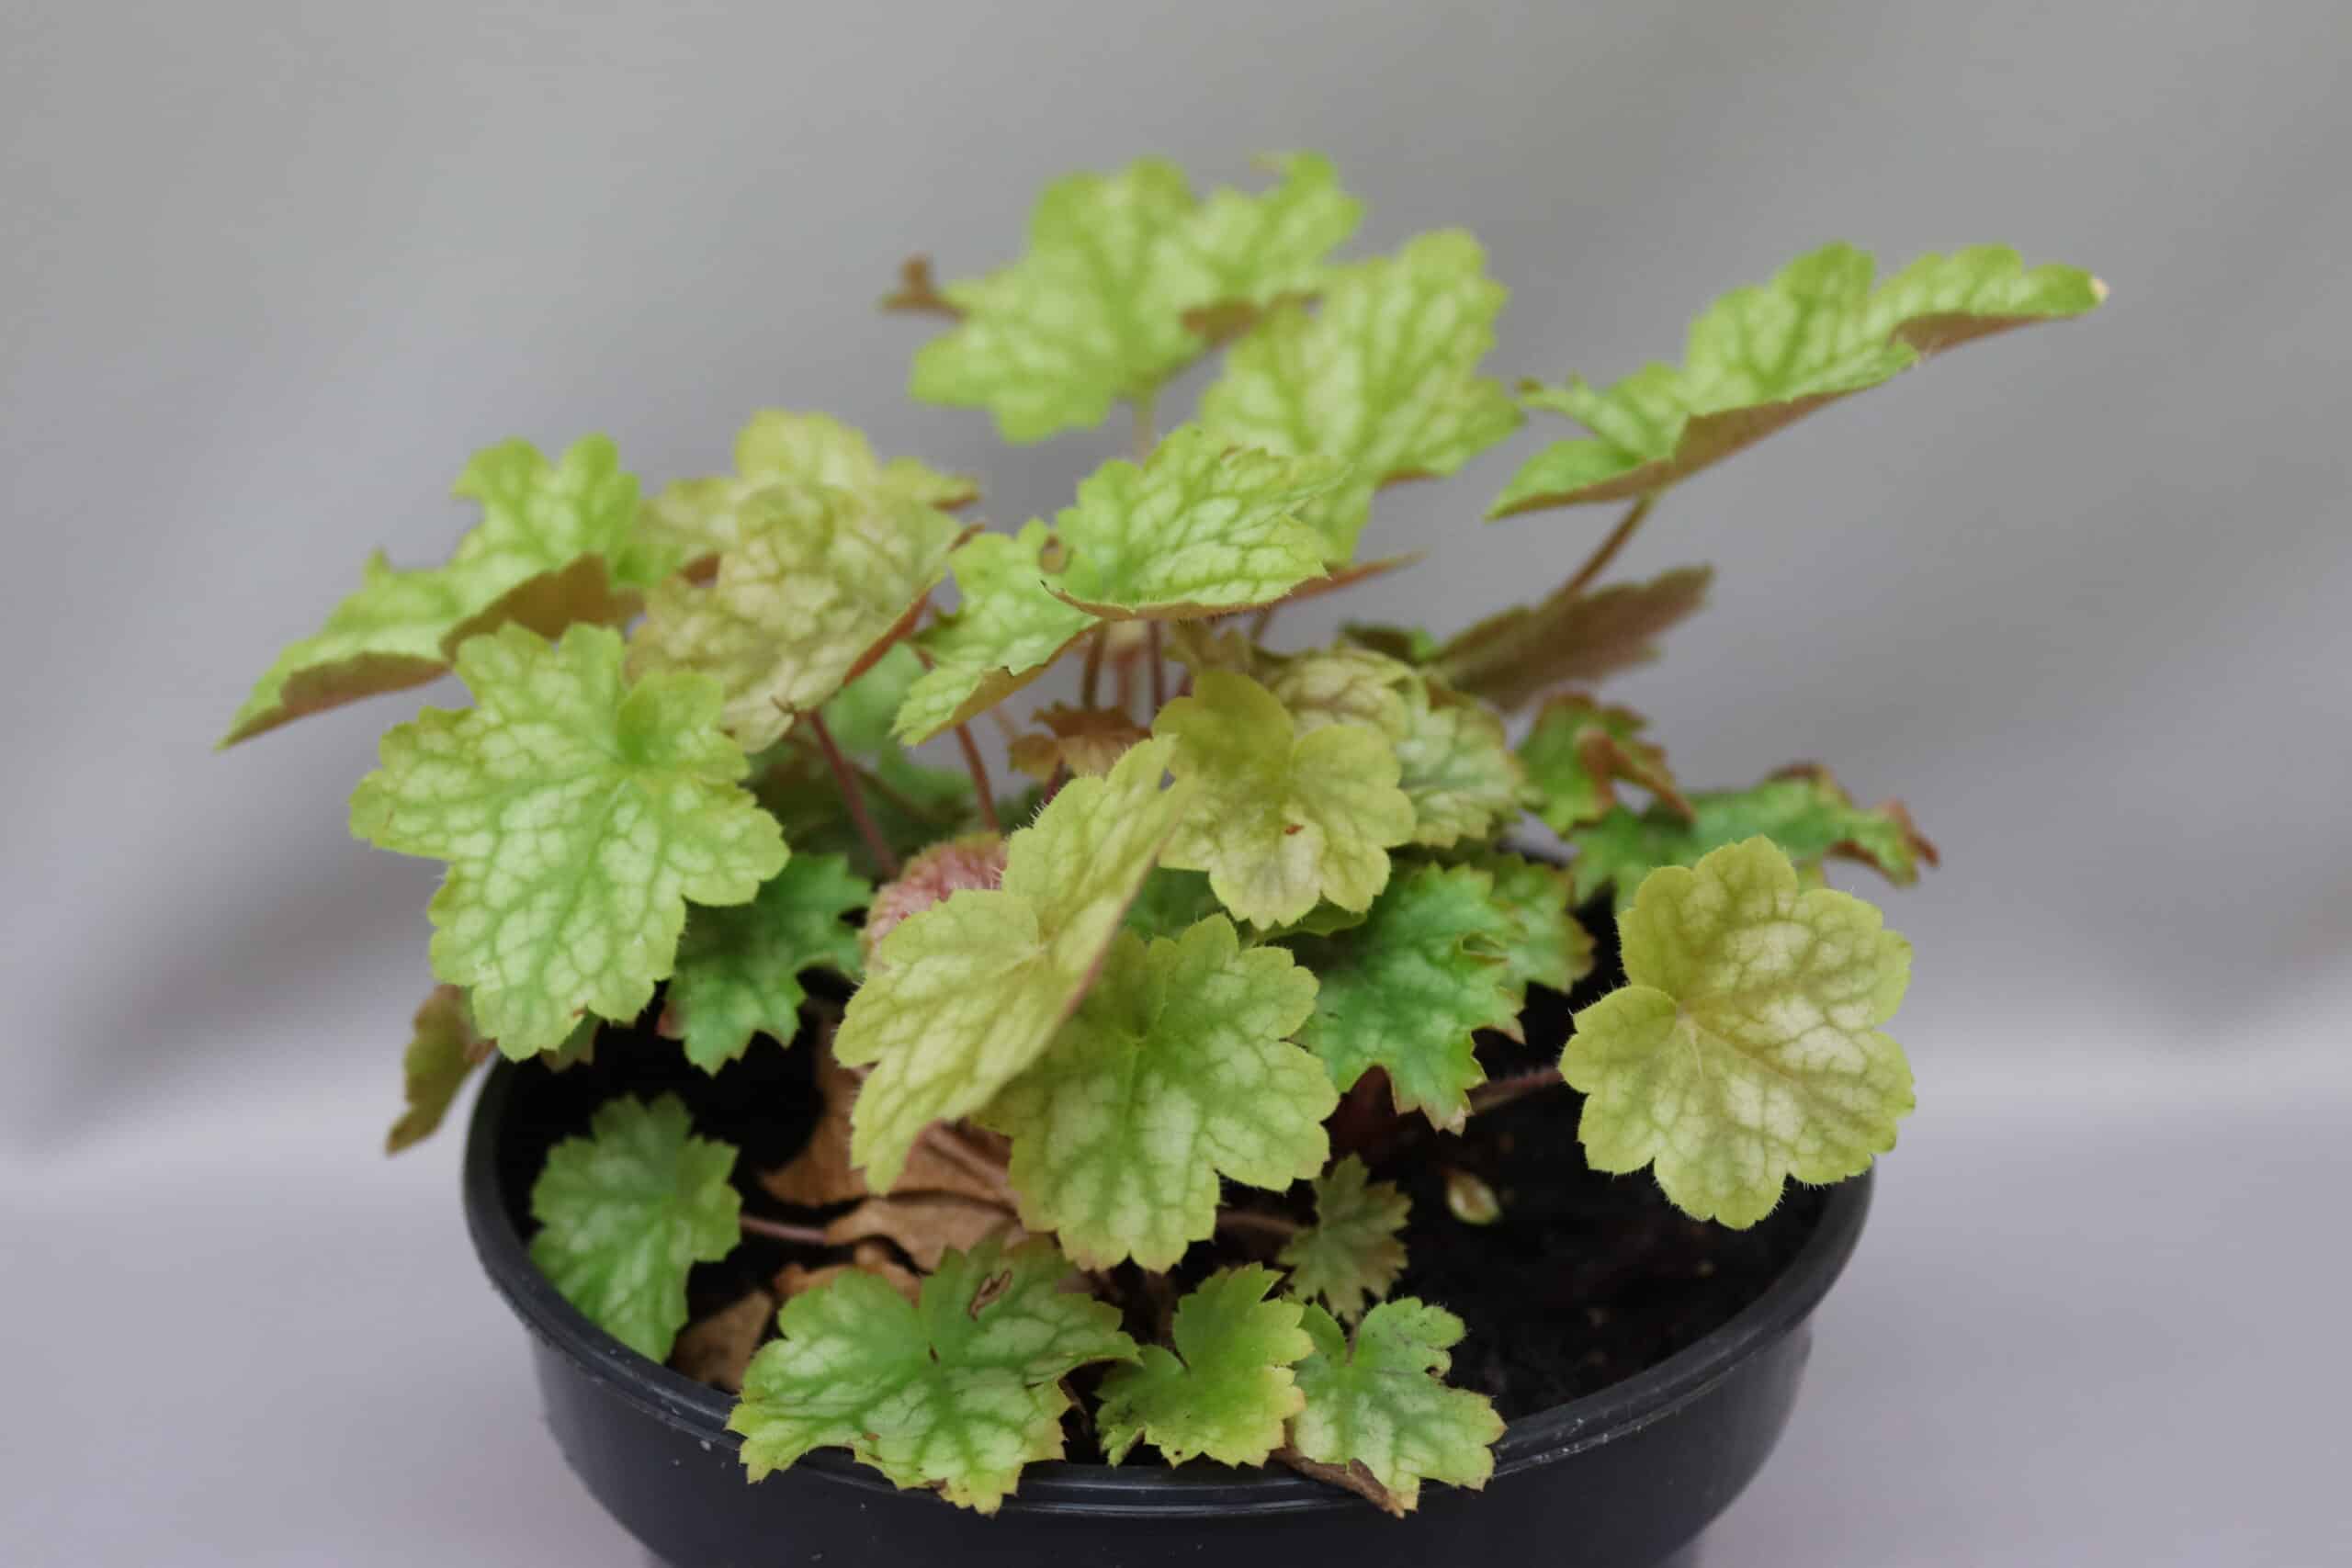 Close-up of the variegated green leaves of the Coral Bells Ginger Ale plant in a black pot.